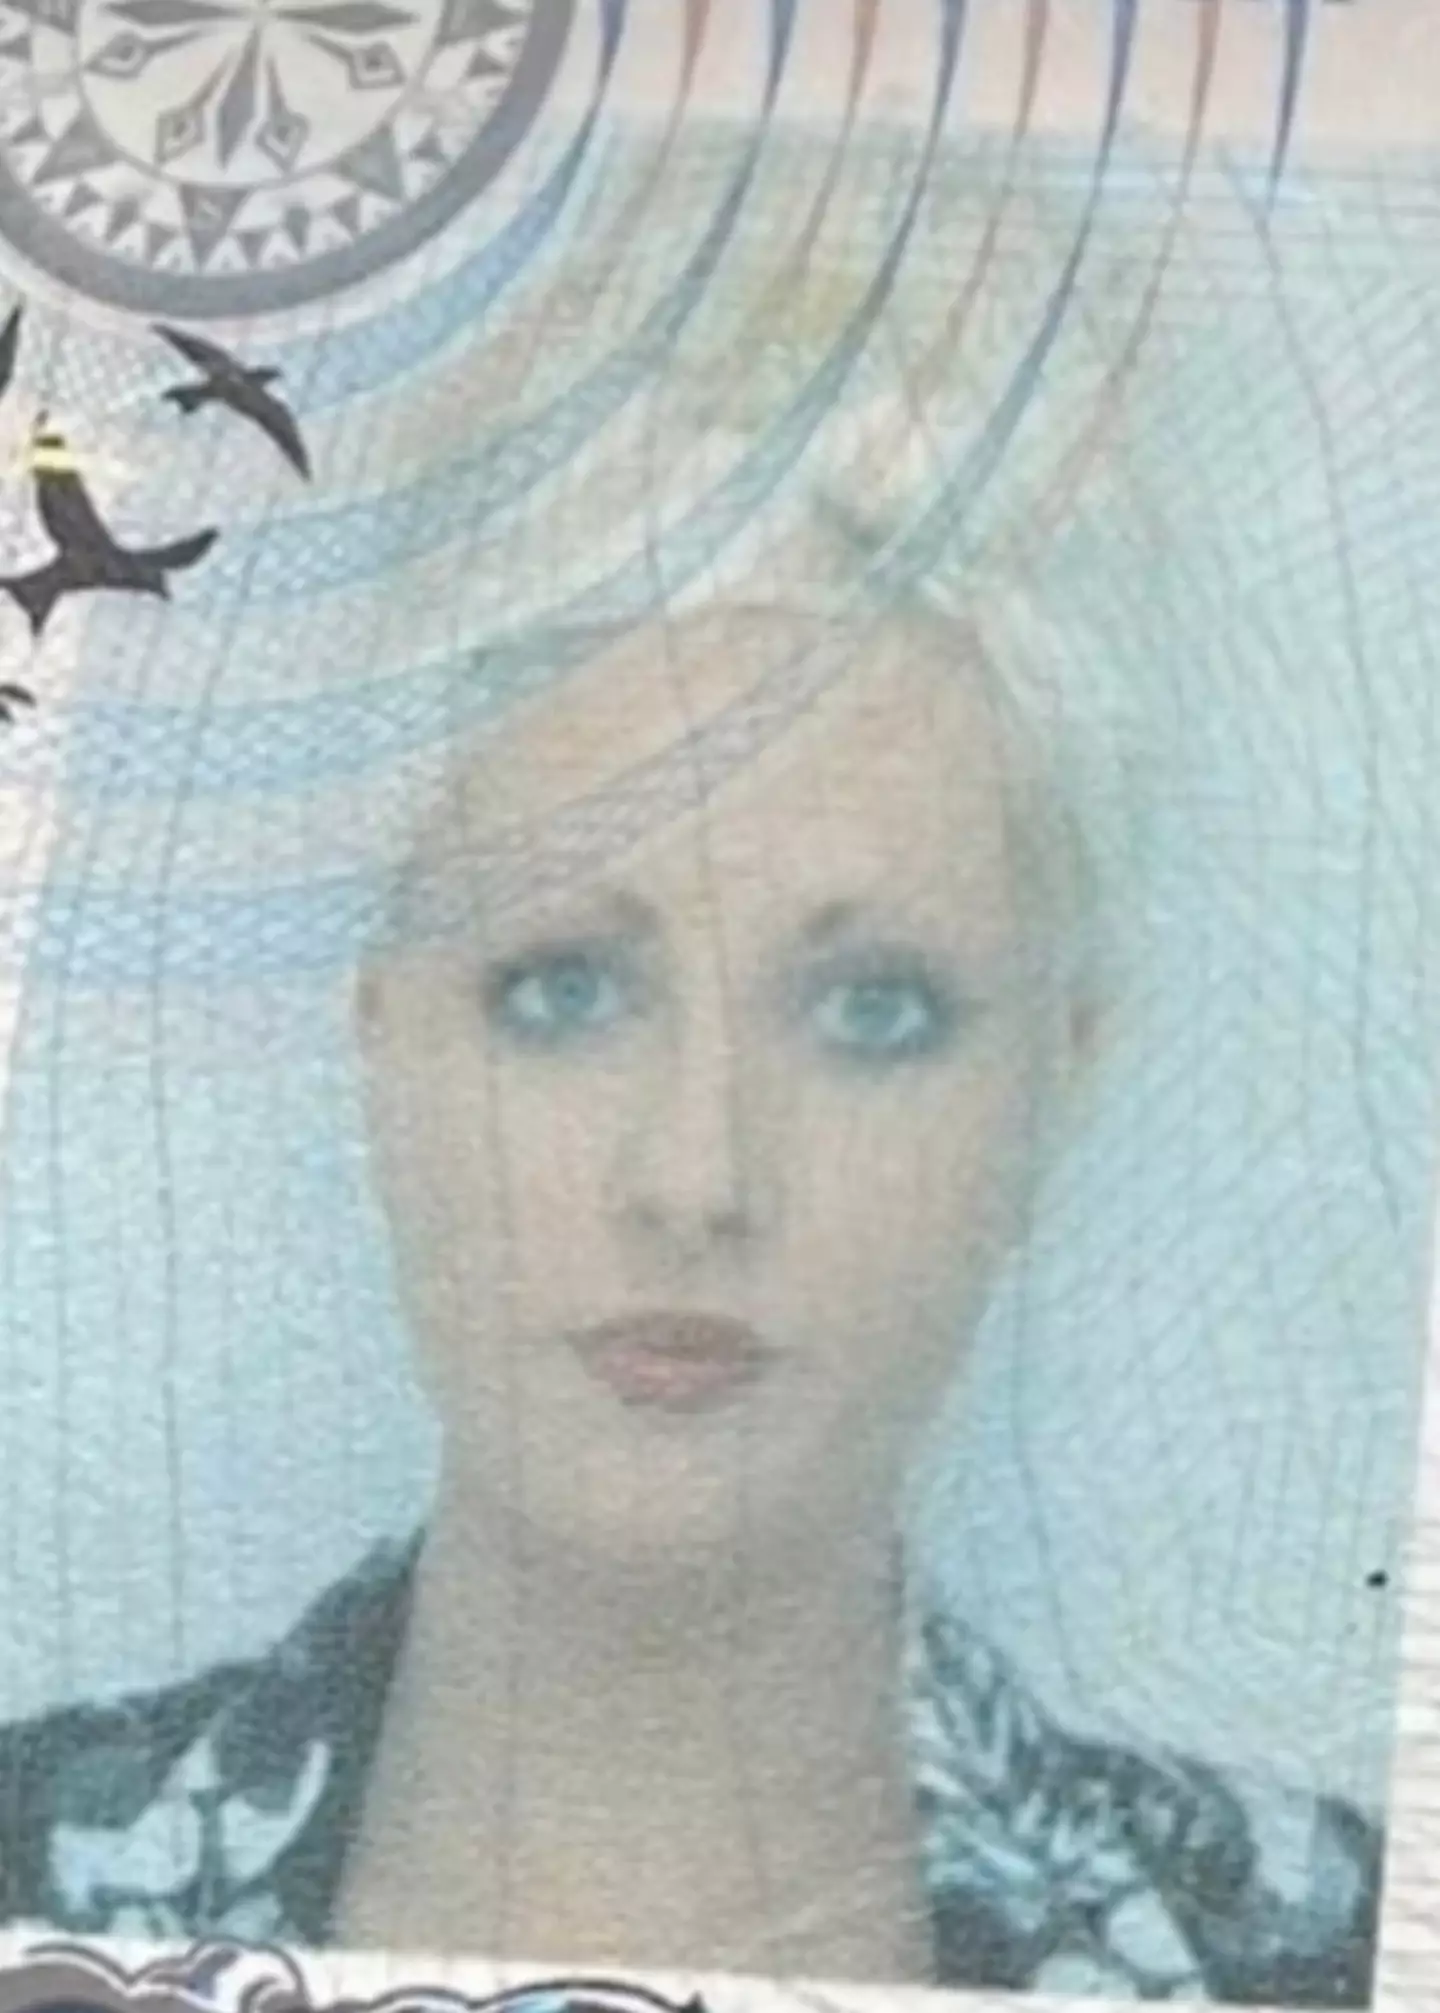 The beautician barely resembles her old passport photo.